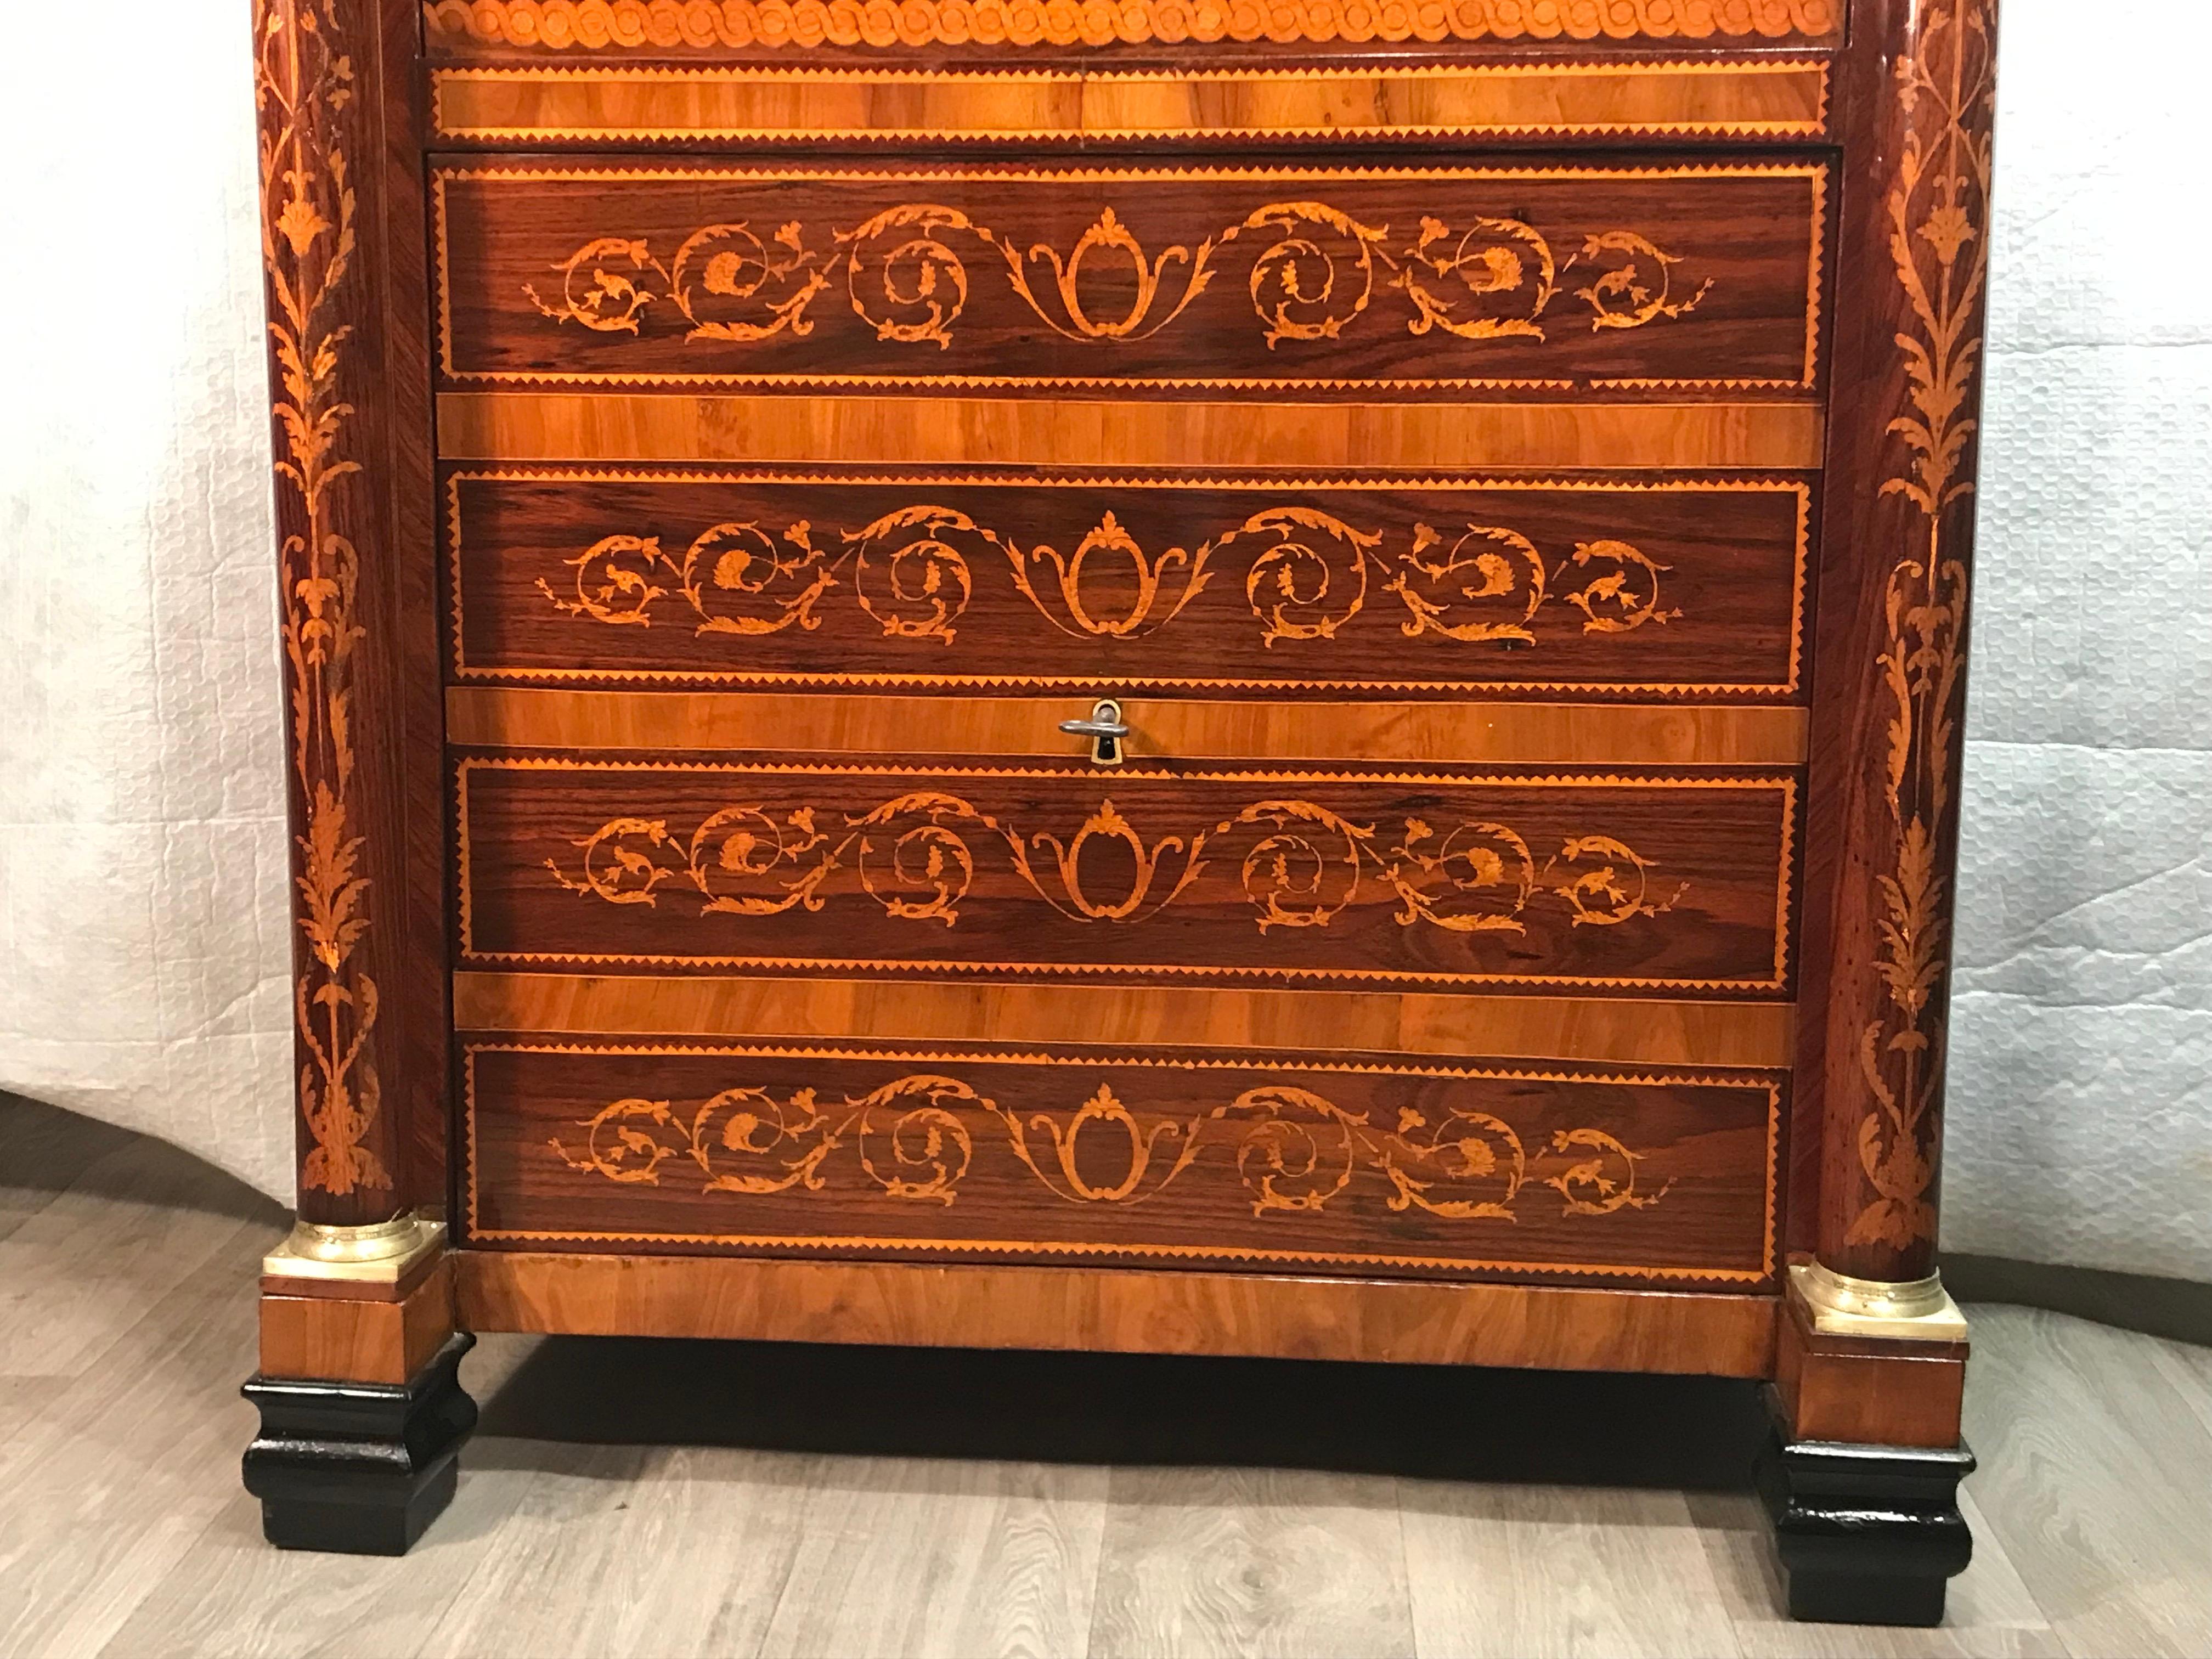 This unique Neoclassical Secretary desk dates back to the beginning of the 19th century, around 1800, and was made in Italy. The secretaire has two columns and a gorgeous marquetry decoration on front and sides. In the lower part it has 4 drawers